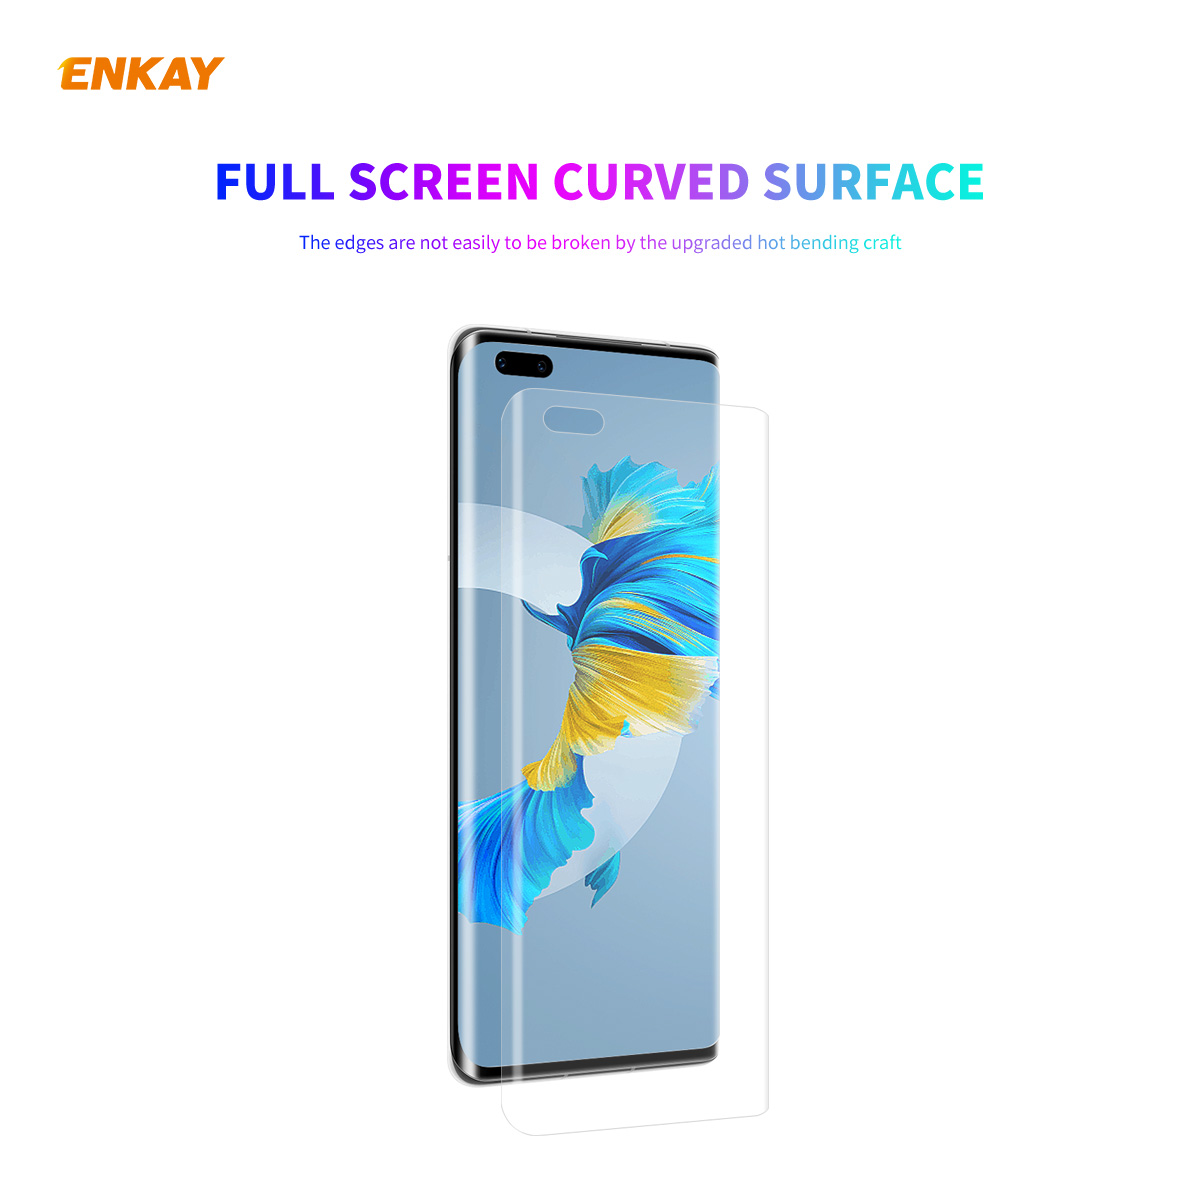 Enkay-for-Huawei-Mate-40-Pro--40-Pro--40-RS-Front-Film-High-Definition-3D-Curved-Edge-Hot-Blending-F-1783592-1